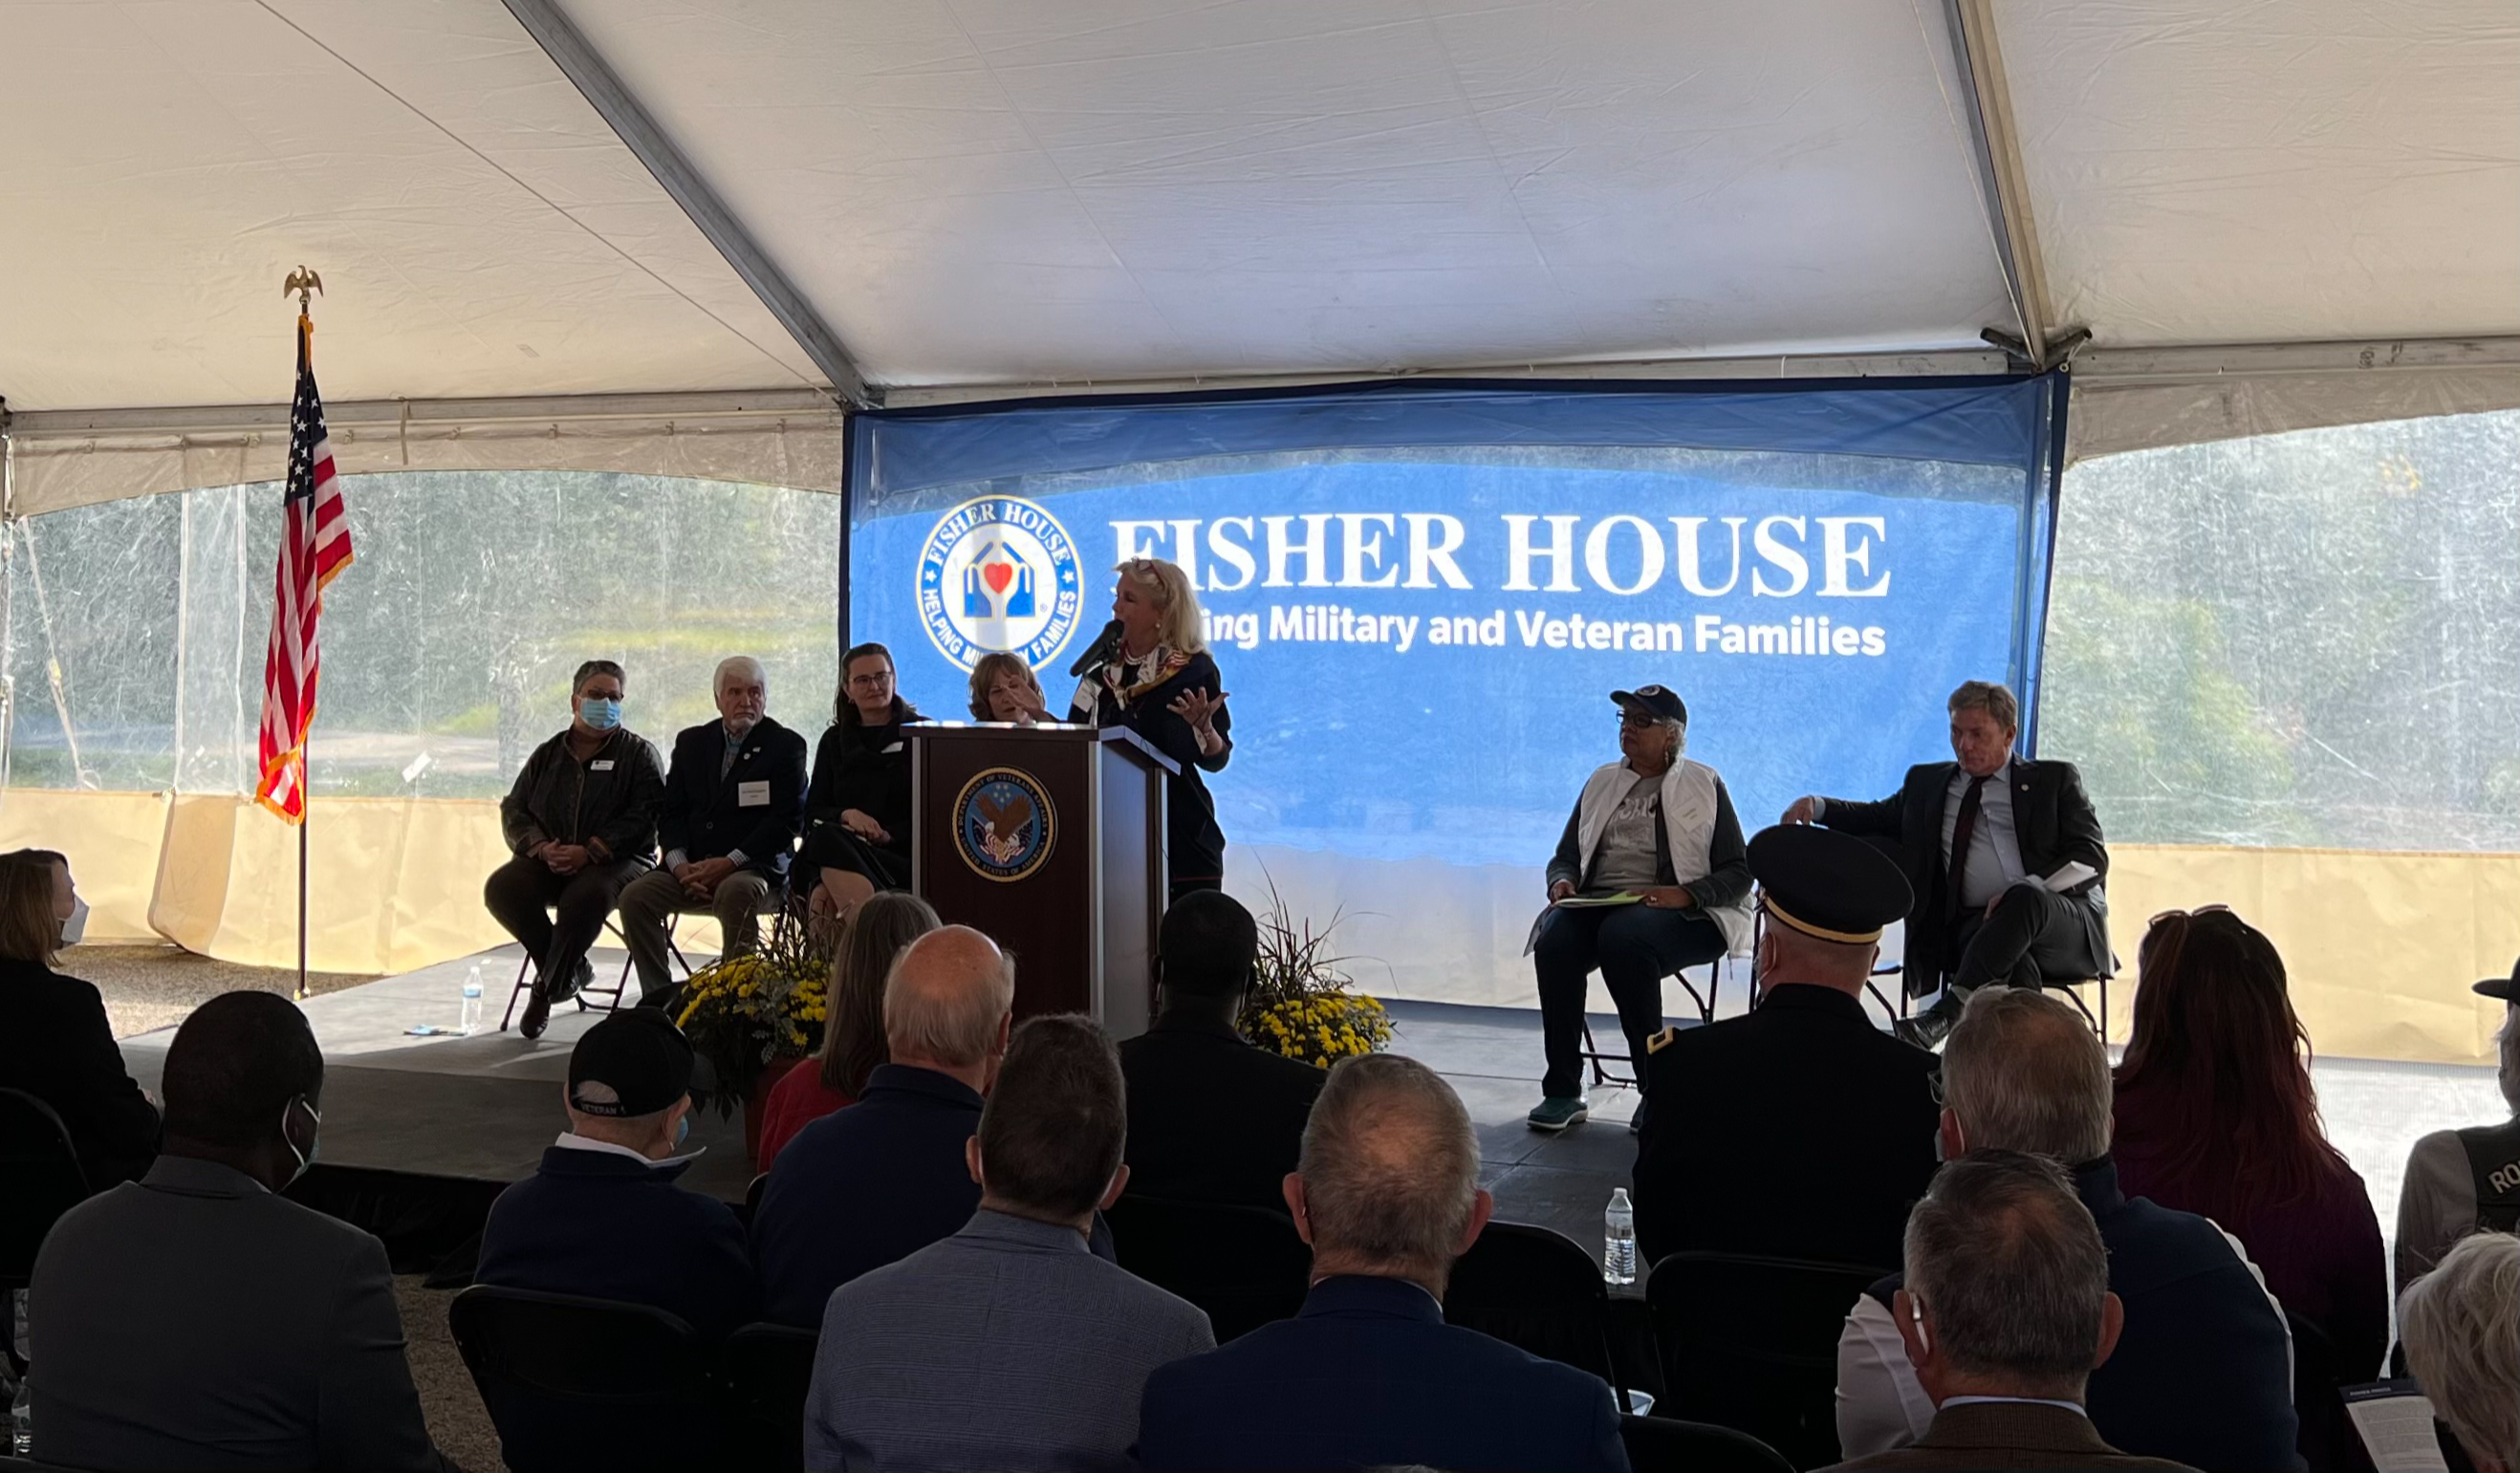 a2 fisher house dedication